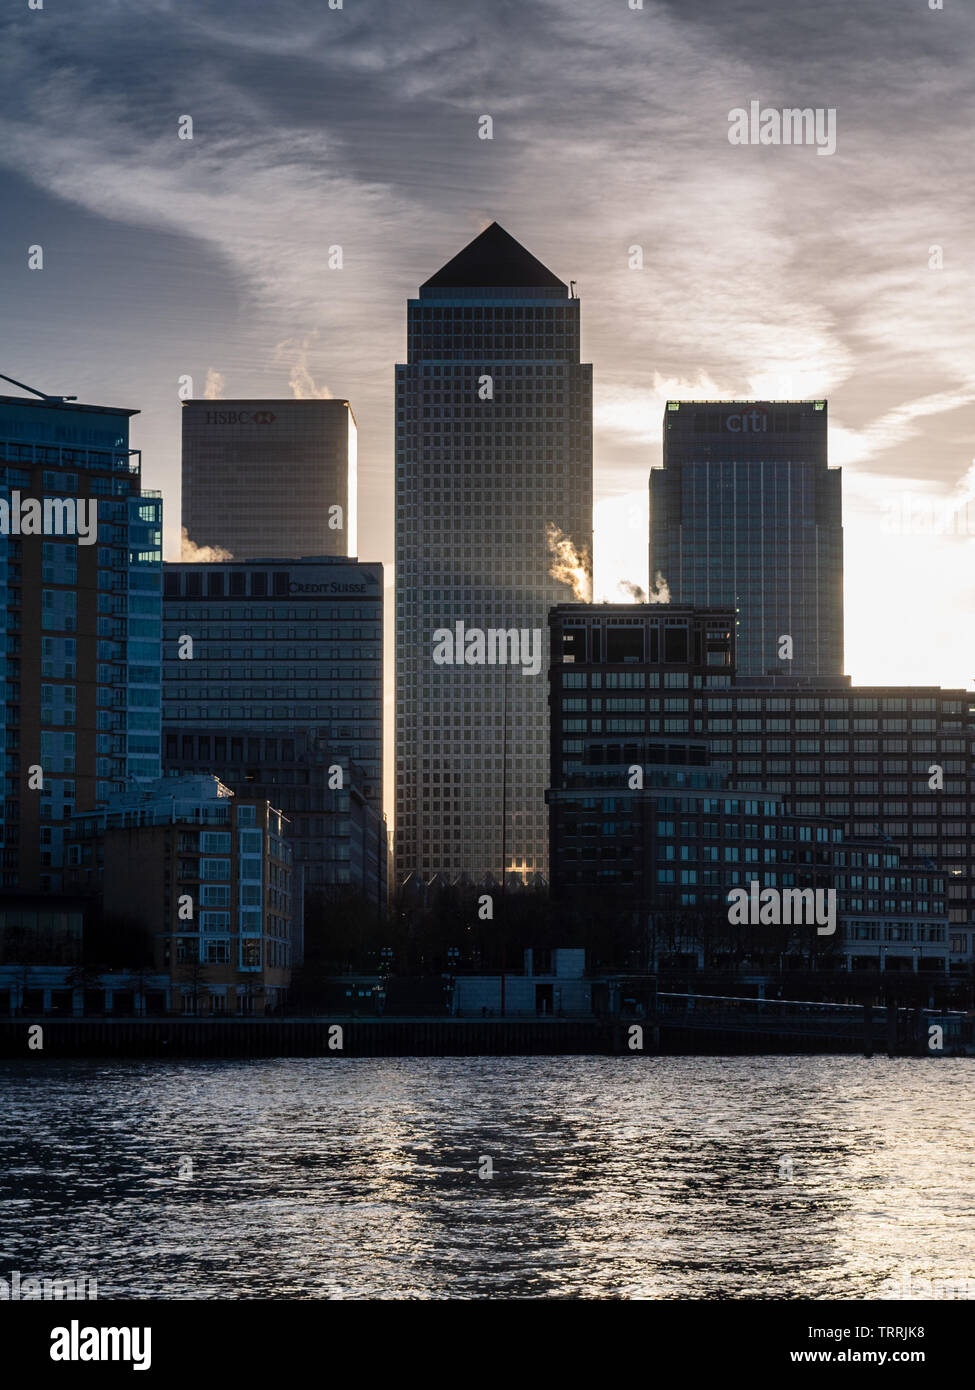 London, England, UK - March 11, 2011: Skyscrapers of the Canary Wharf business district are silhouetted against the sunrise in East London. Stock Photo